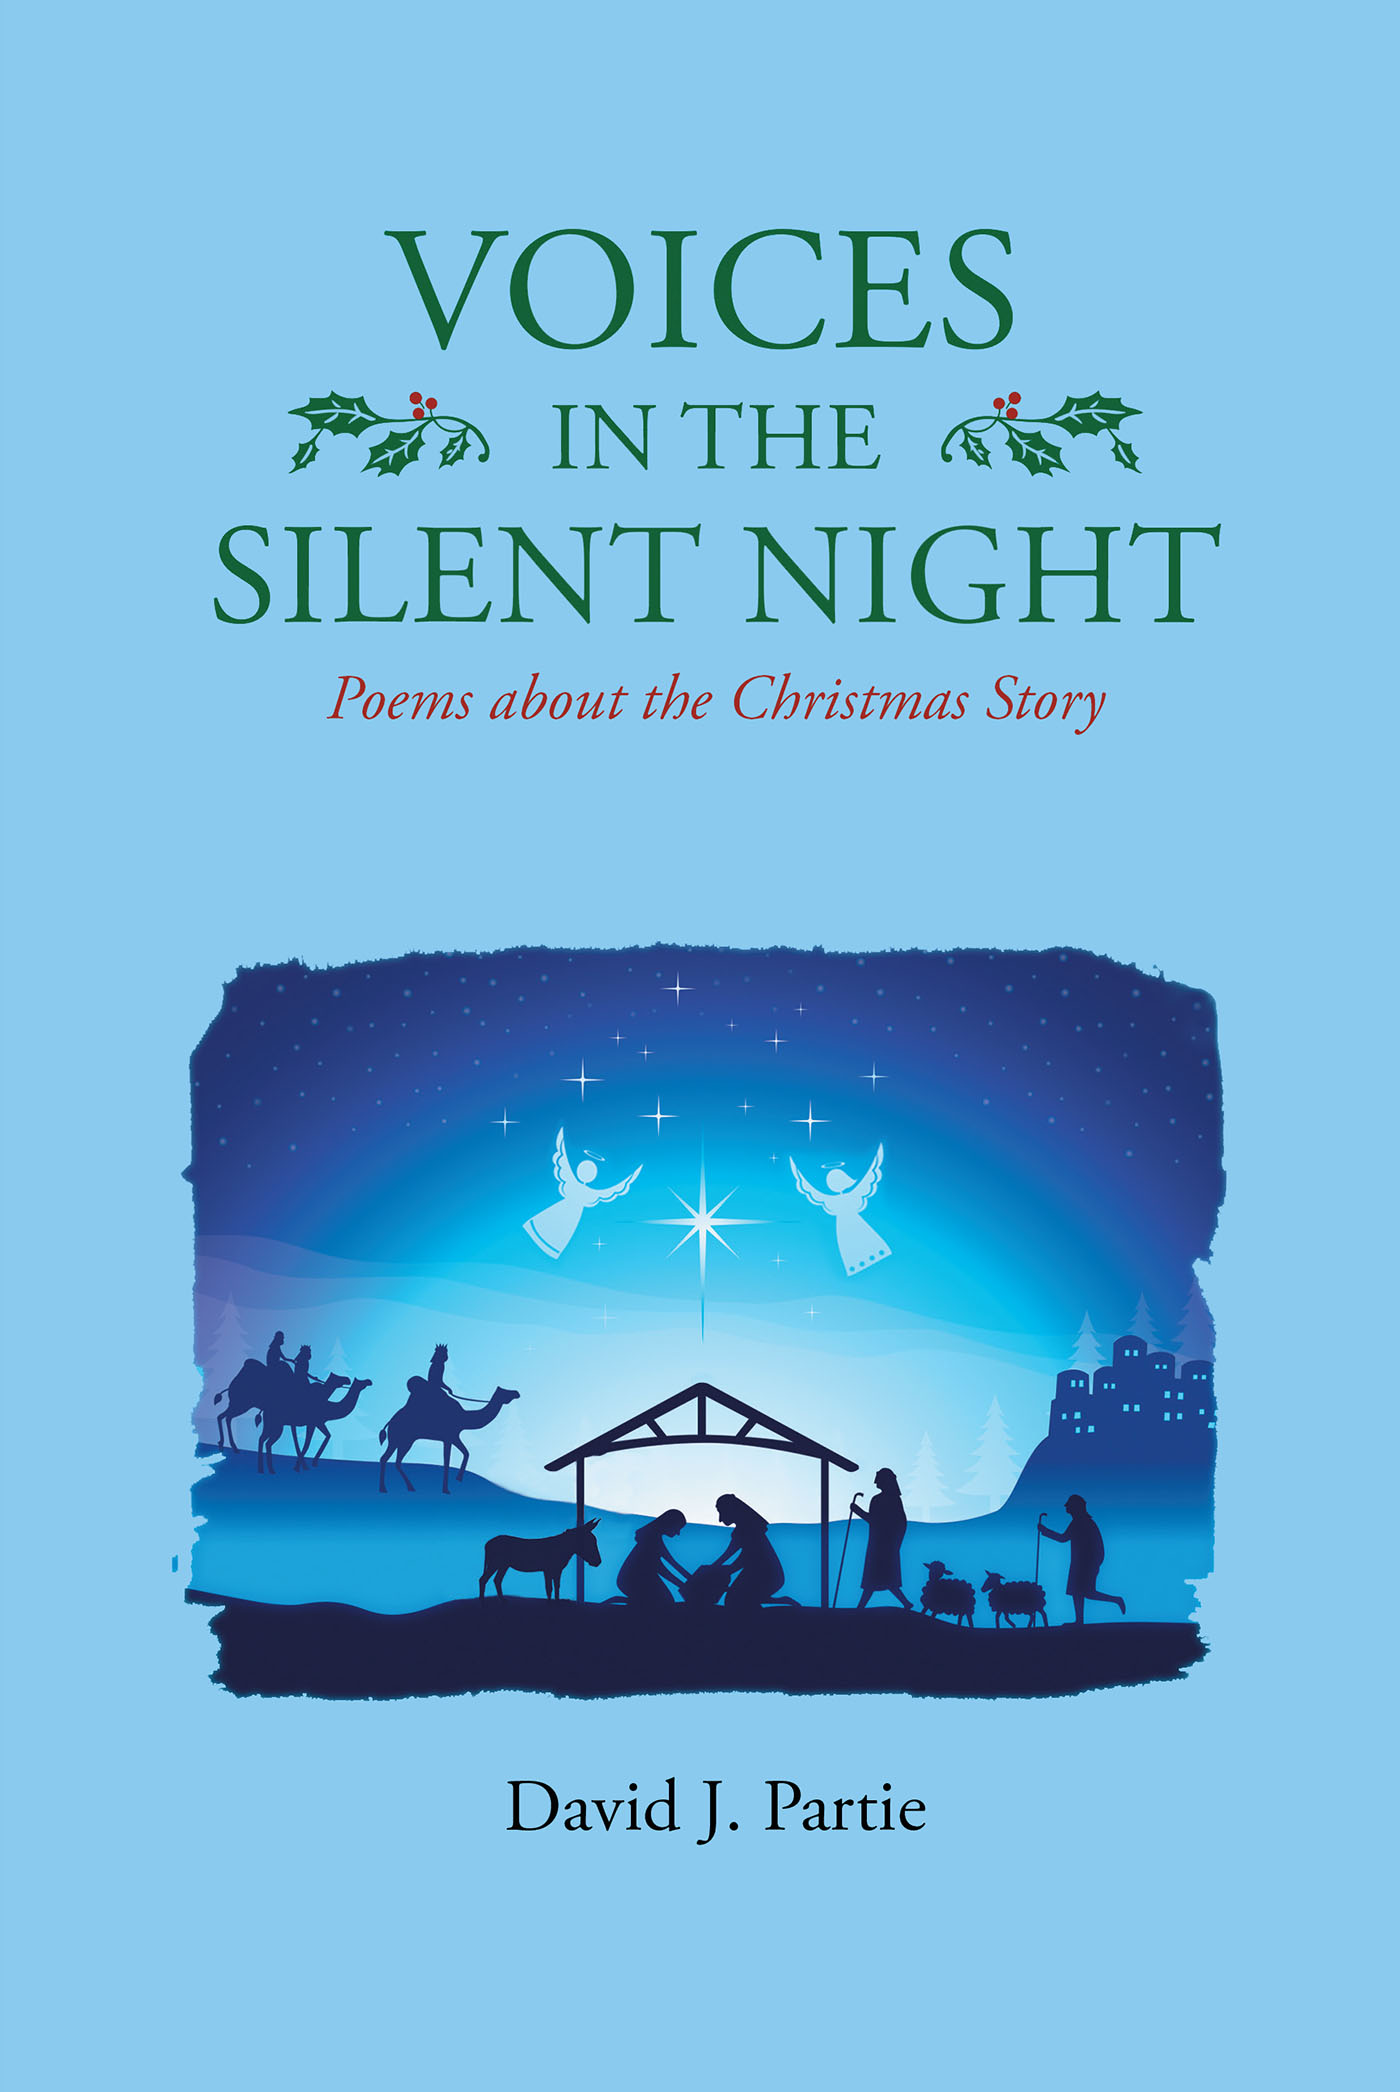 Author David Partie’s New Book, “Voices in the Silent Night: Poems about the Christmas Story,” Revitalizes the Traditional Christmas Story Through Festive Poetry